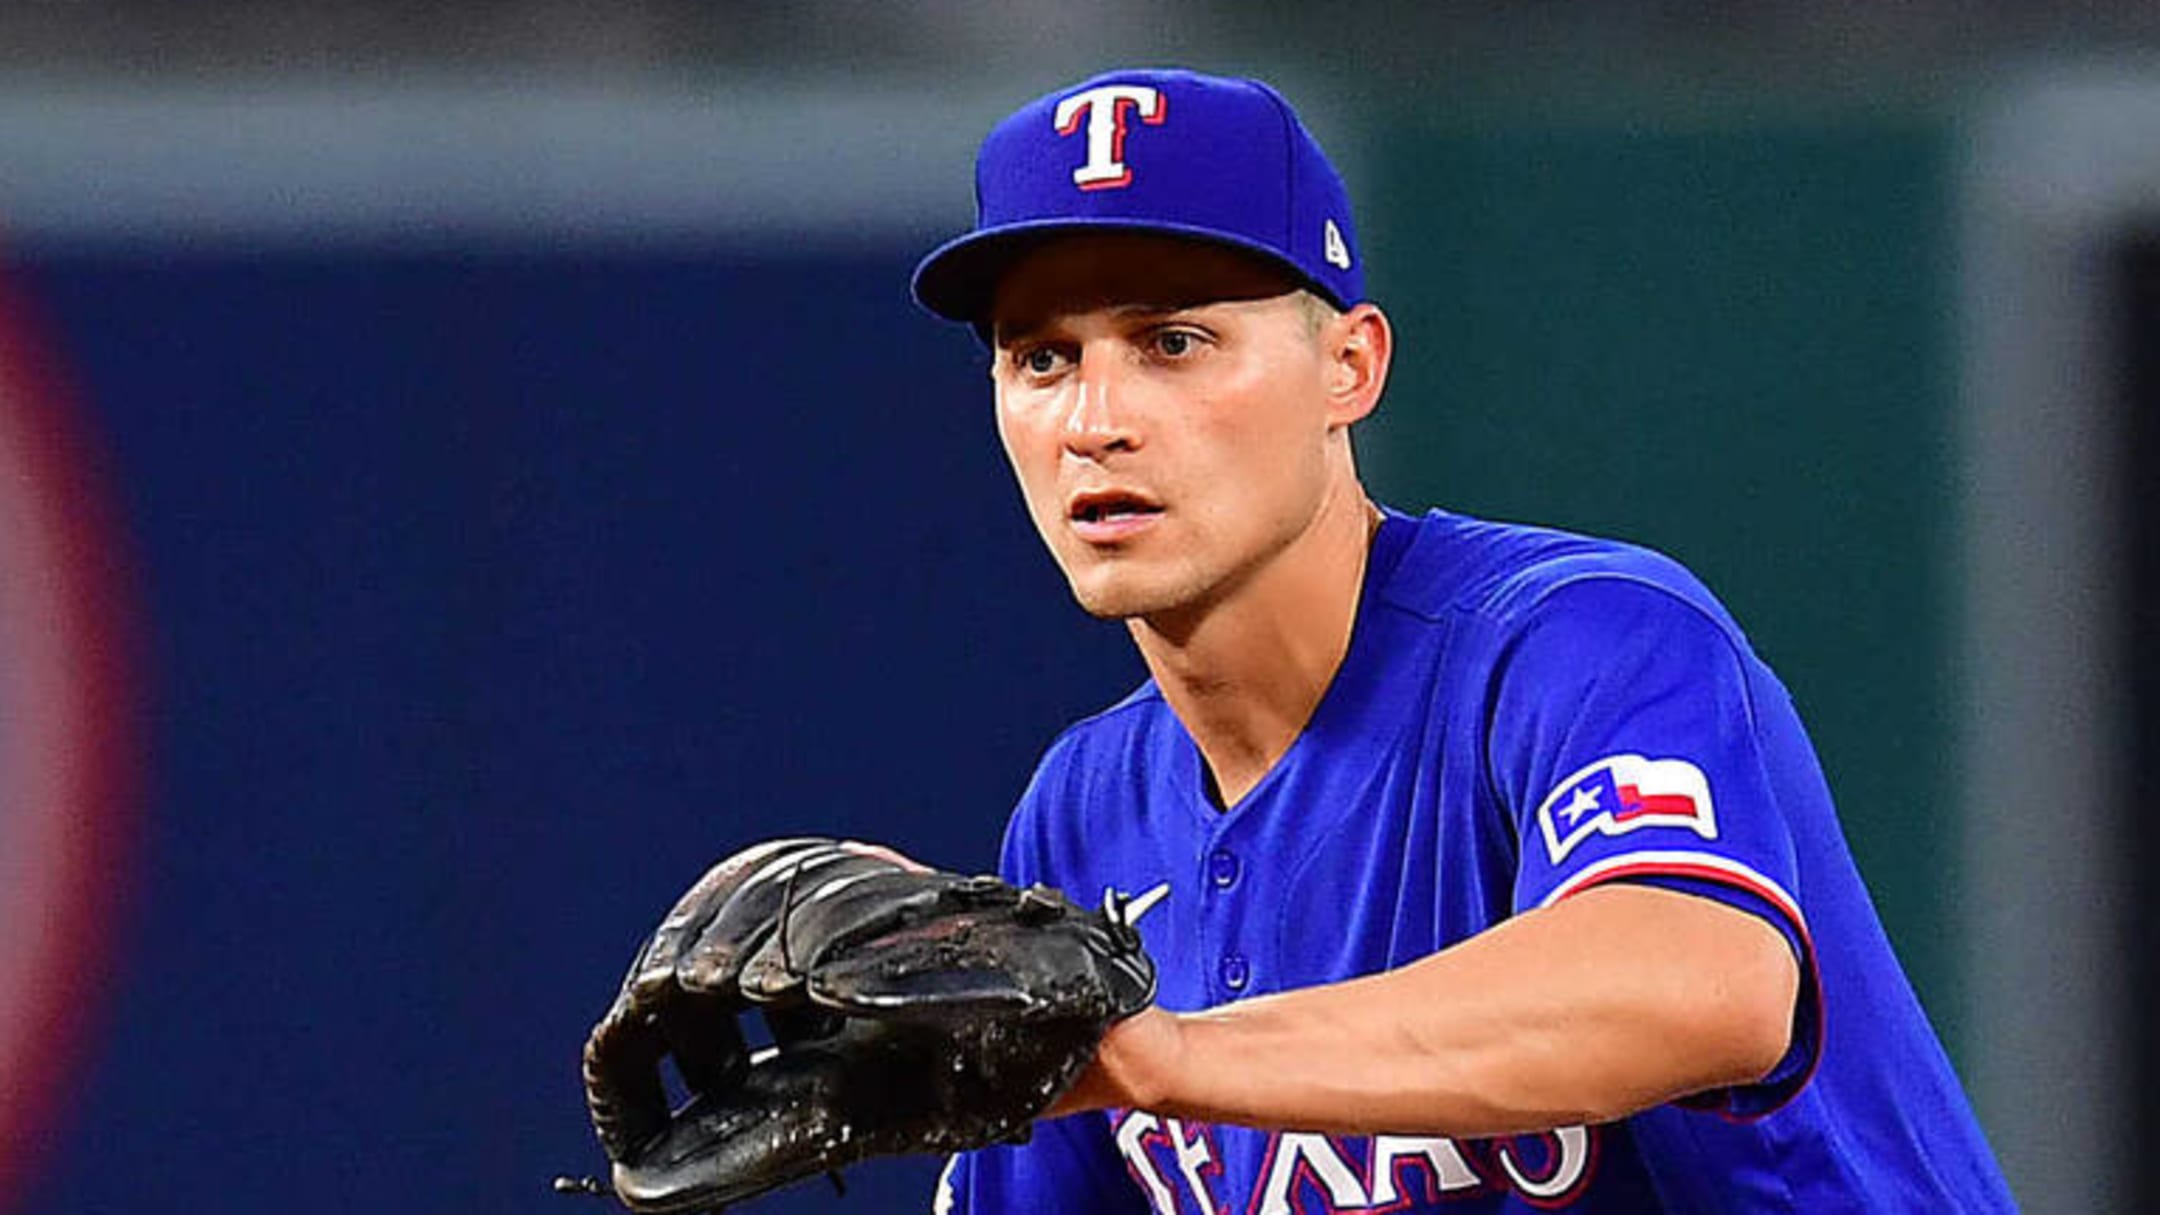 Corey Seager's swat helps Rangers to series-opening win in Detroit